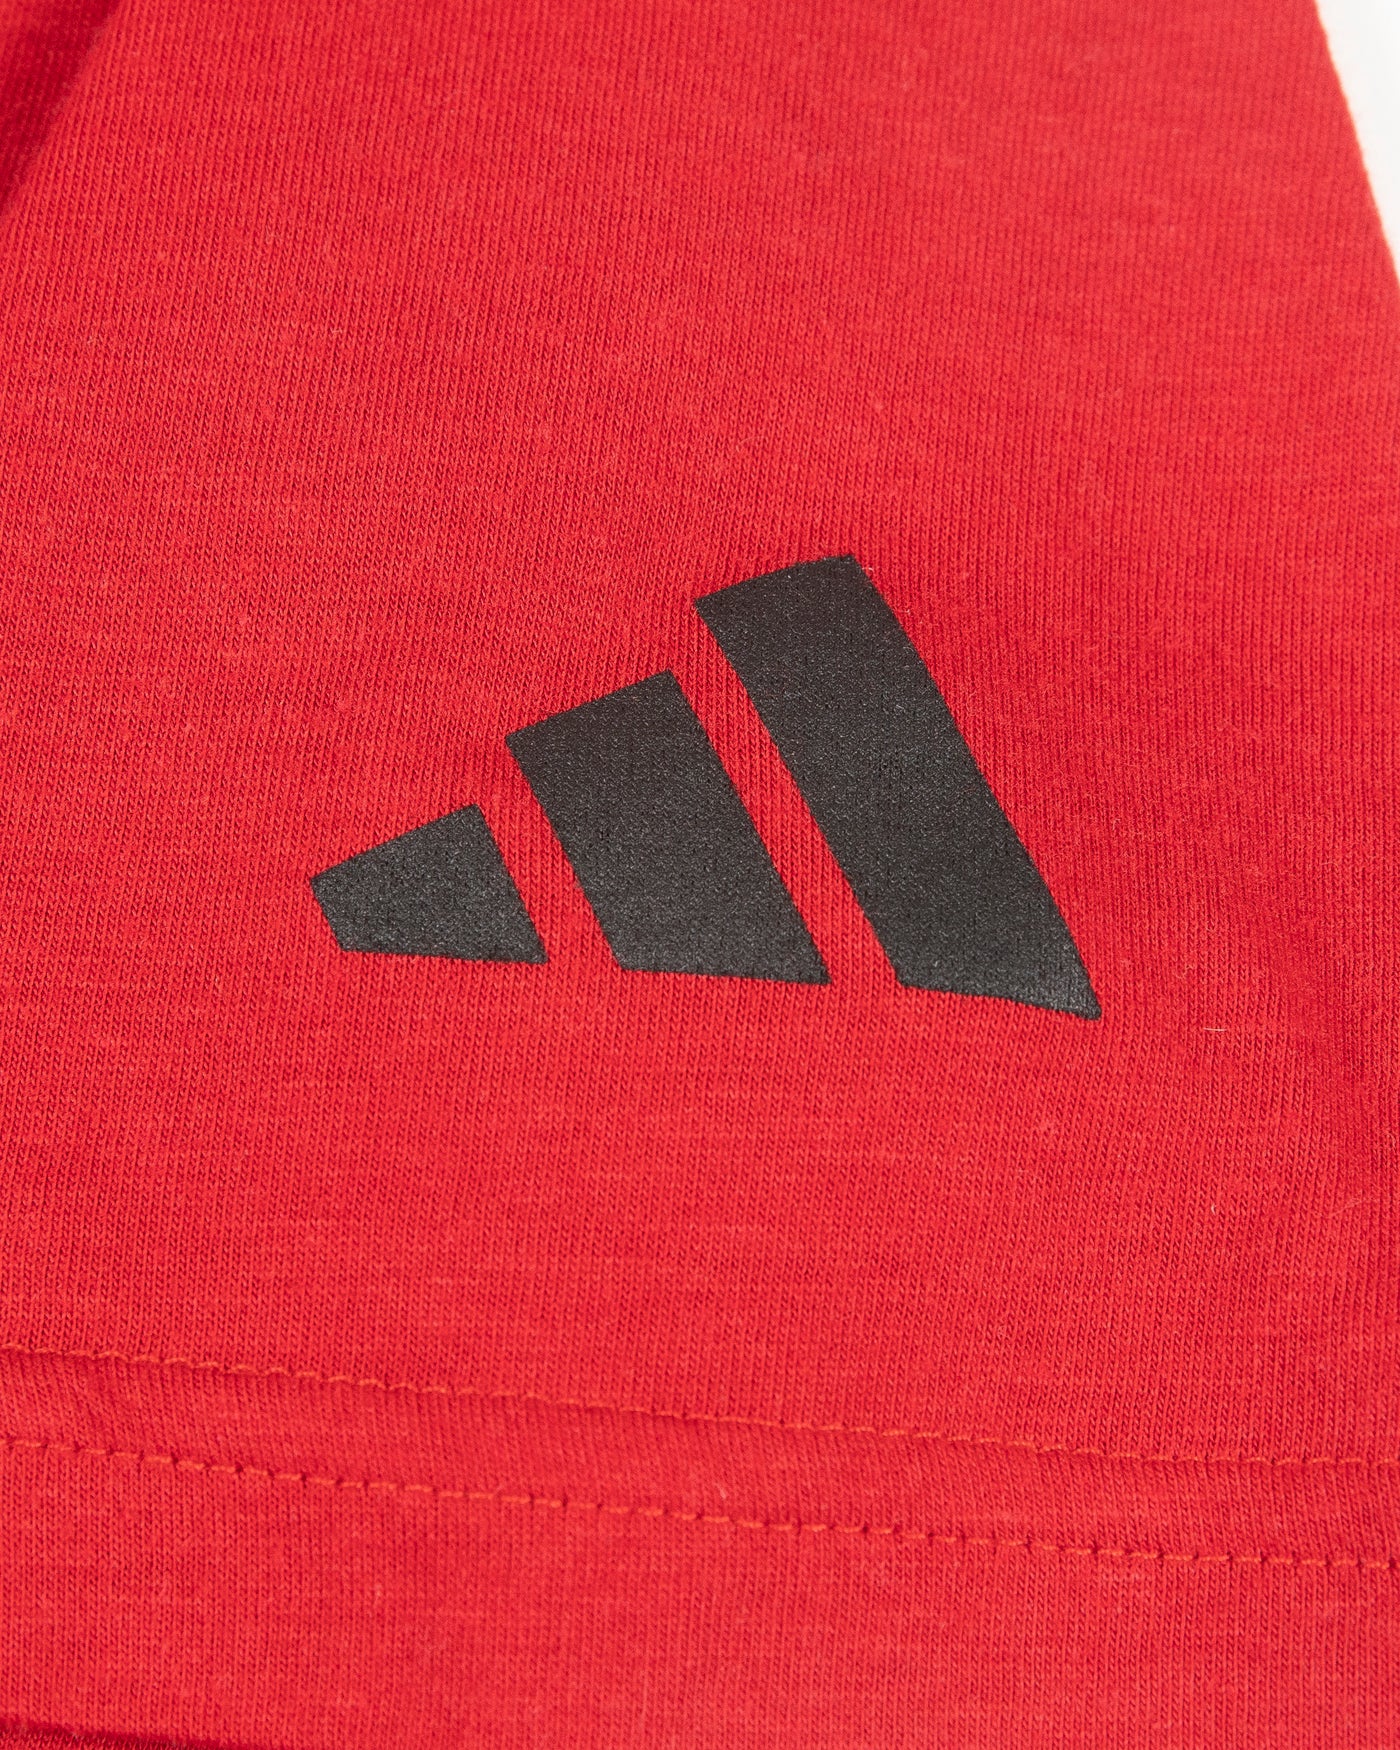 adidas red tee with Chicago Blackhawks word graphic and primary logo on front chest - alt detail lay flat